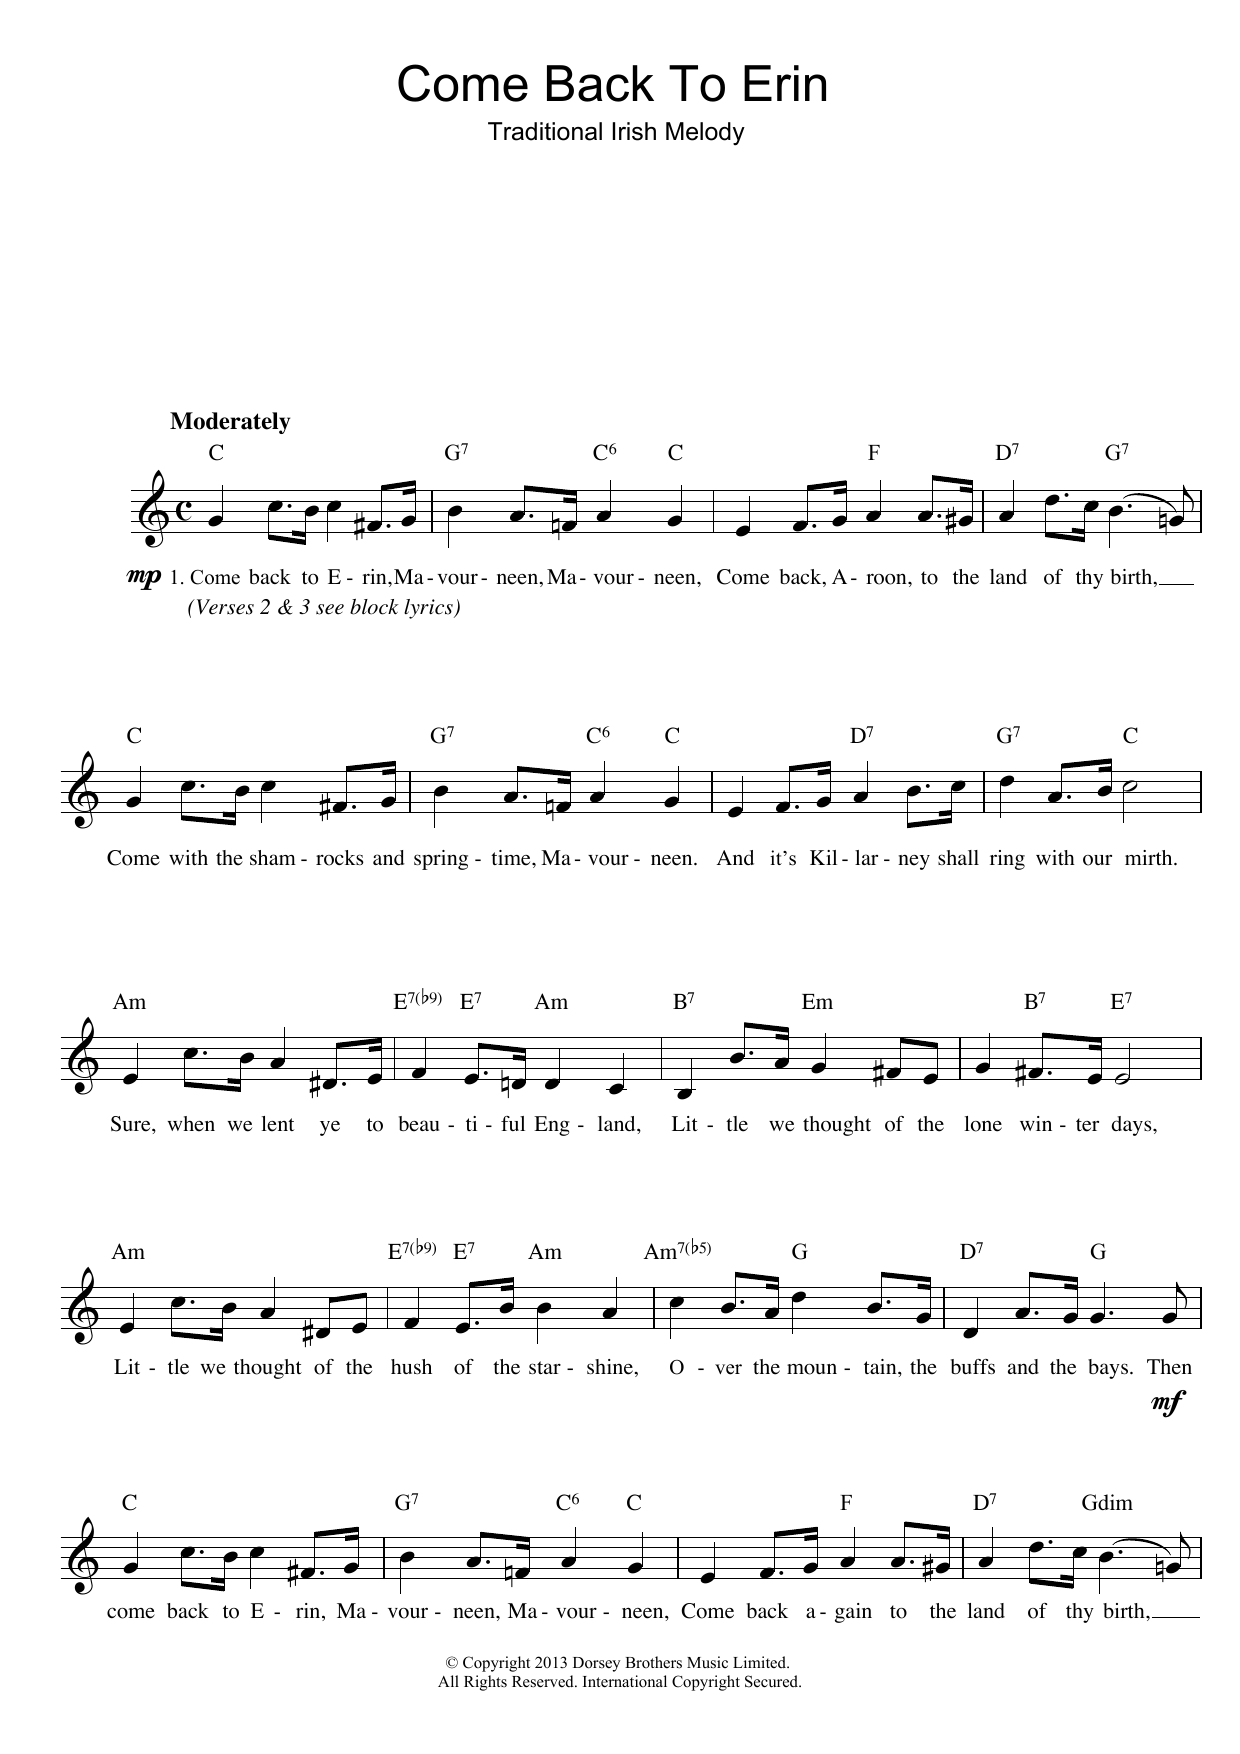 Download The Corrs Come Back To Erin Sheet Music